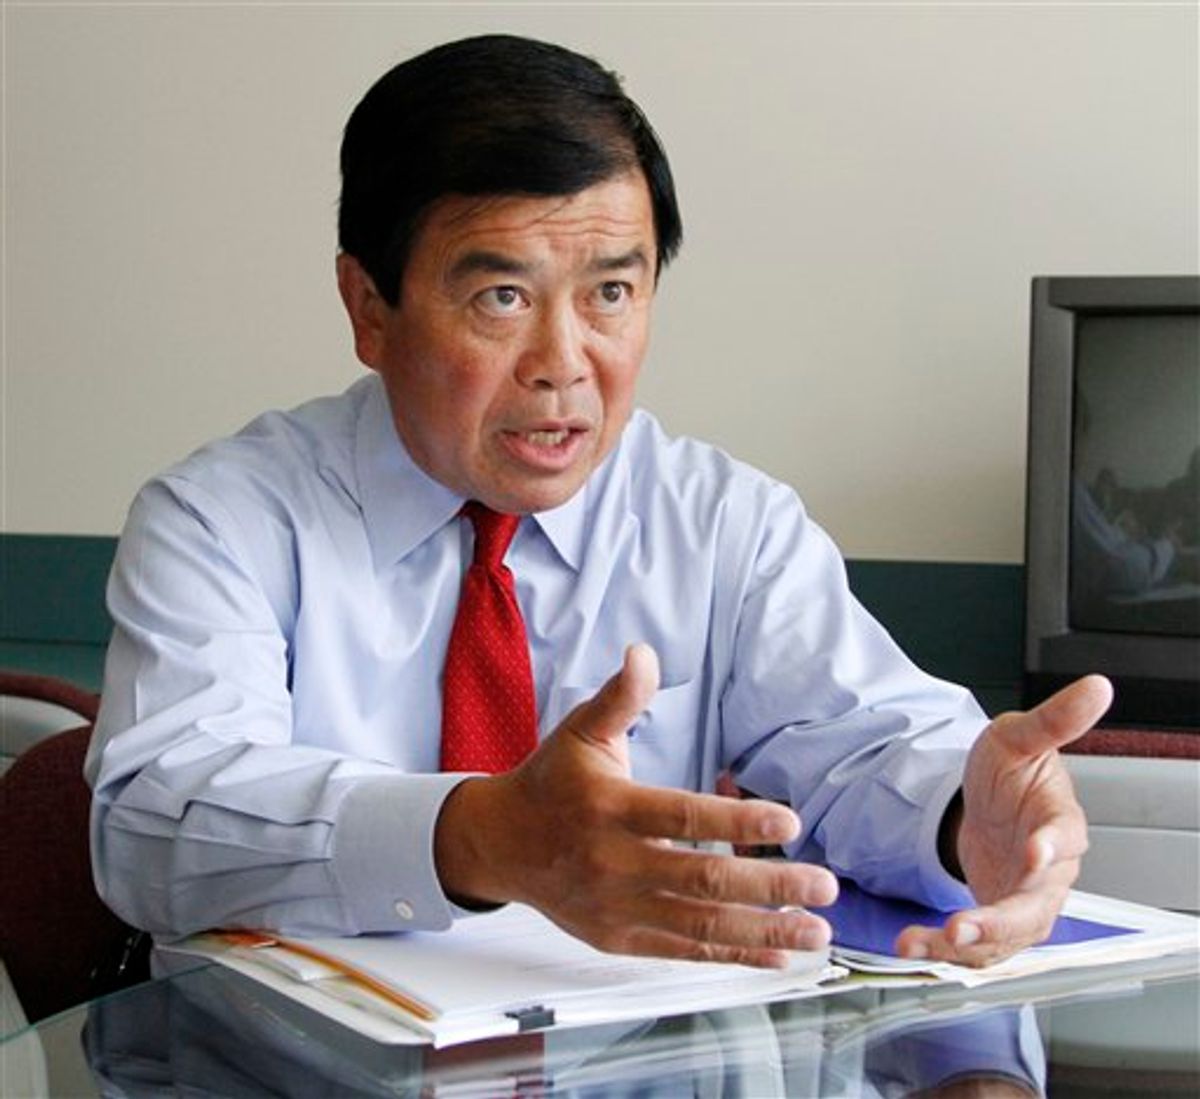 FILE - In this Aug. 17, 2010 file photo, Congressman David Wu, D-Ore., speaks during an interview in Portland, Ore. Wu is calling a published report about an alleged unwanted sexual encounter with a young woman "very serious" but has not yet said whether the accusation is true. The Oregonian reports that a young woman from California has accused the Democrat of an unwanted sexual encounter last November. The newspaper said the information came from sources who wanted to remain anonymous. (AP Photo/Don Ryan, File) (AP)